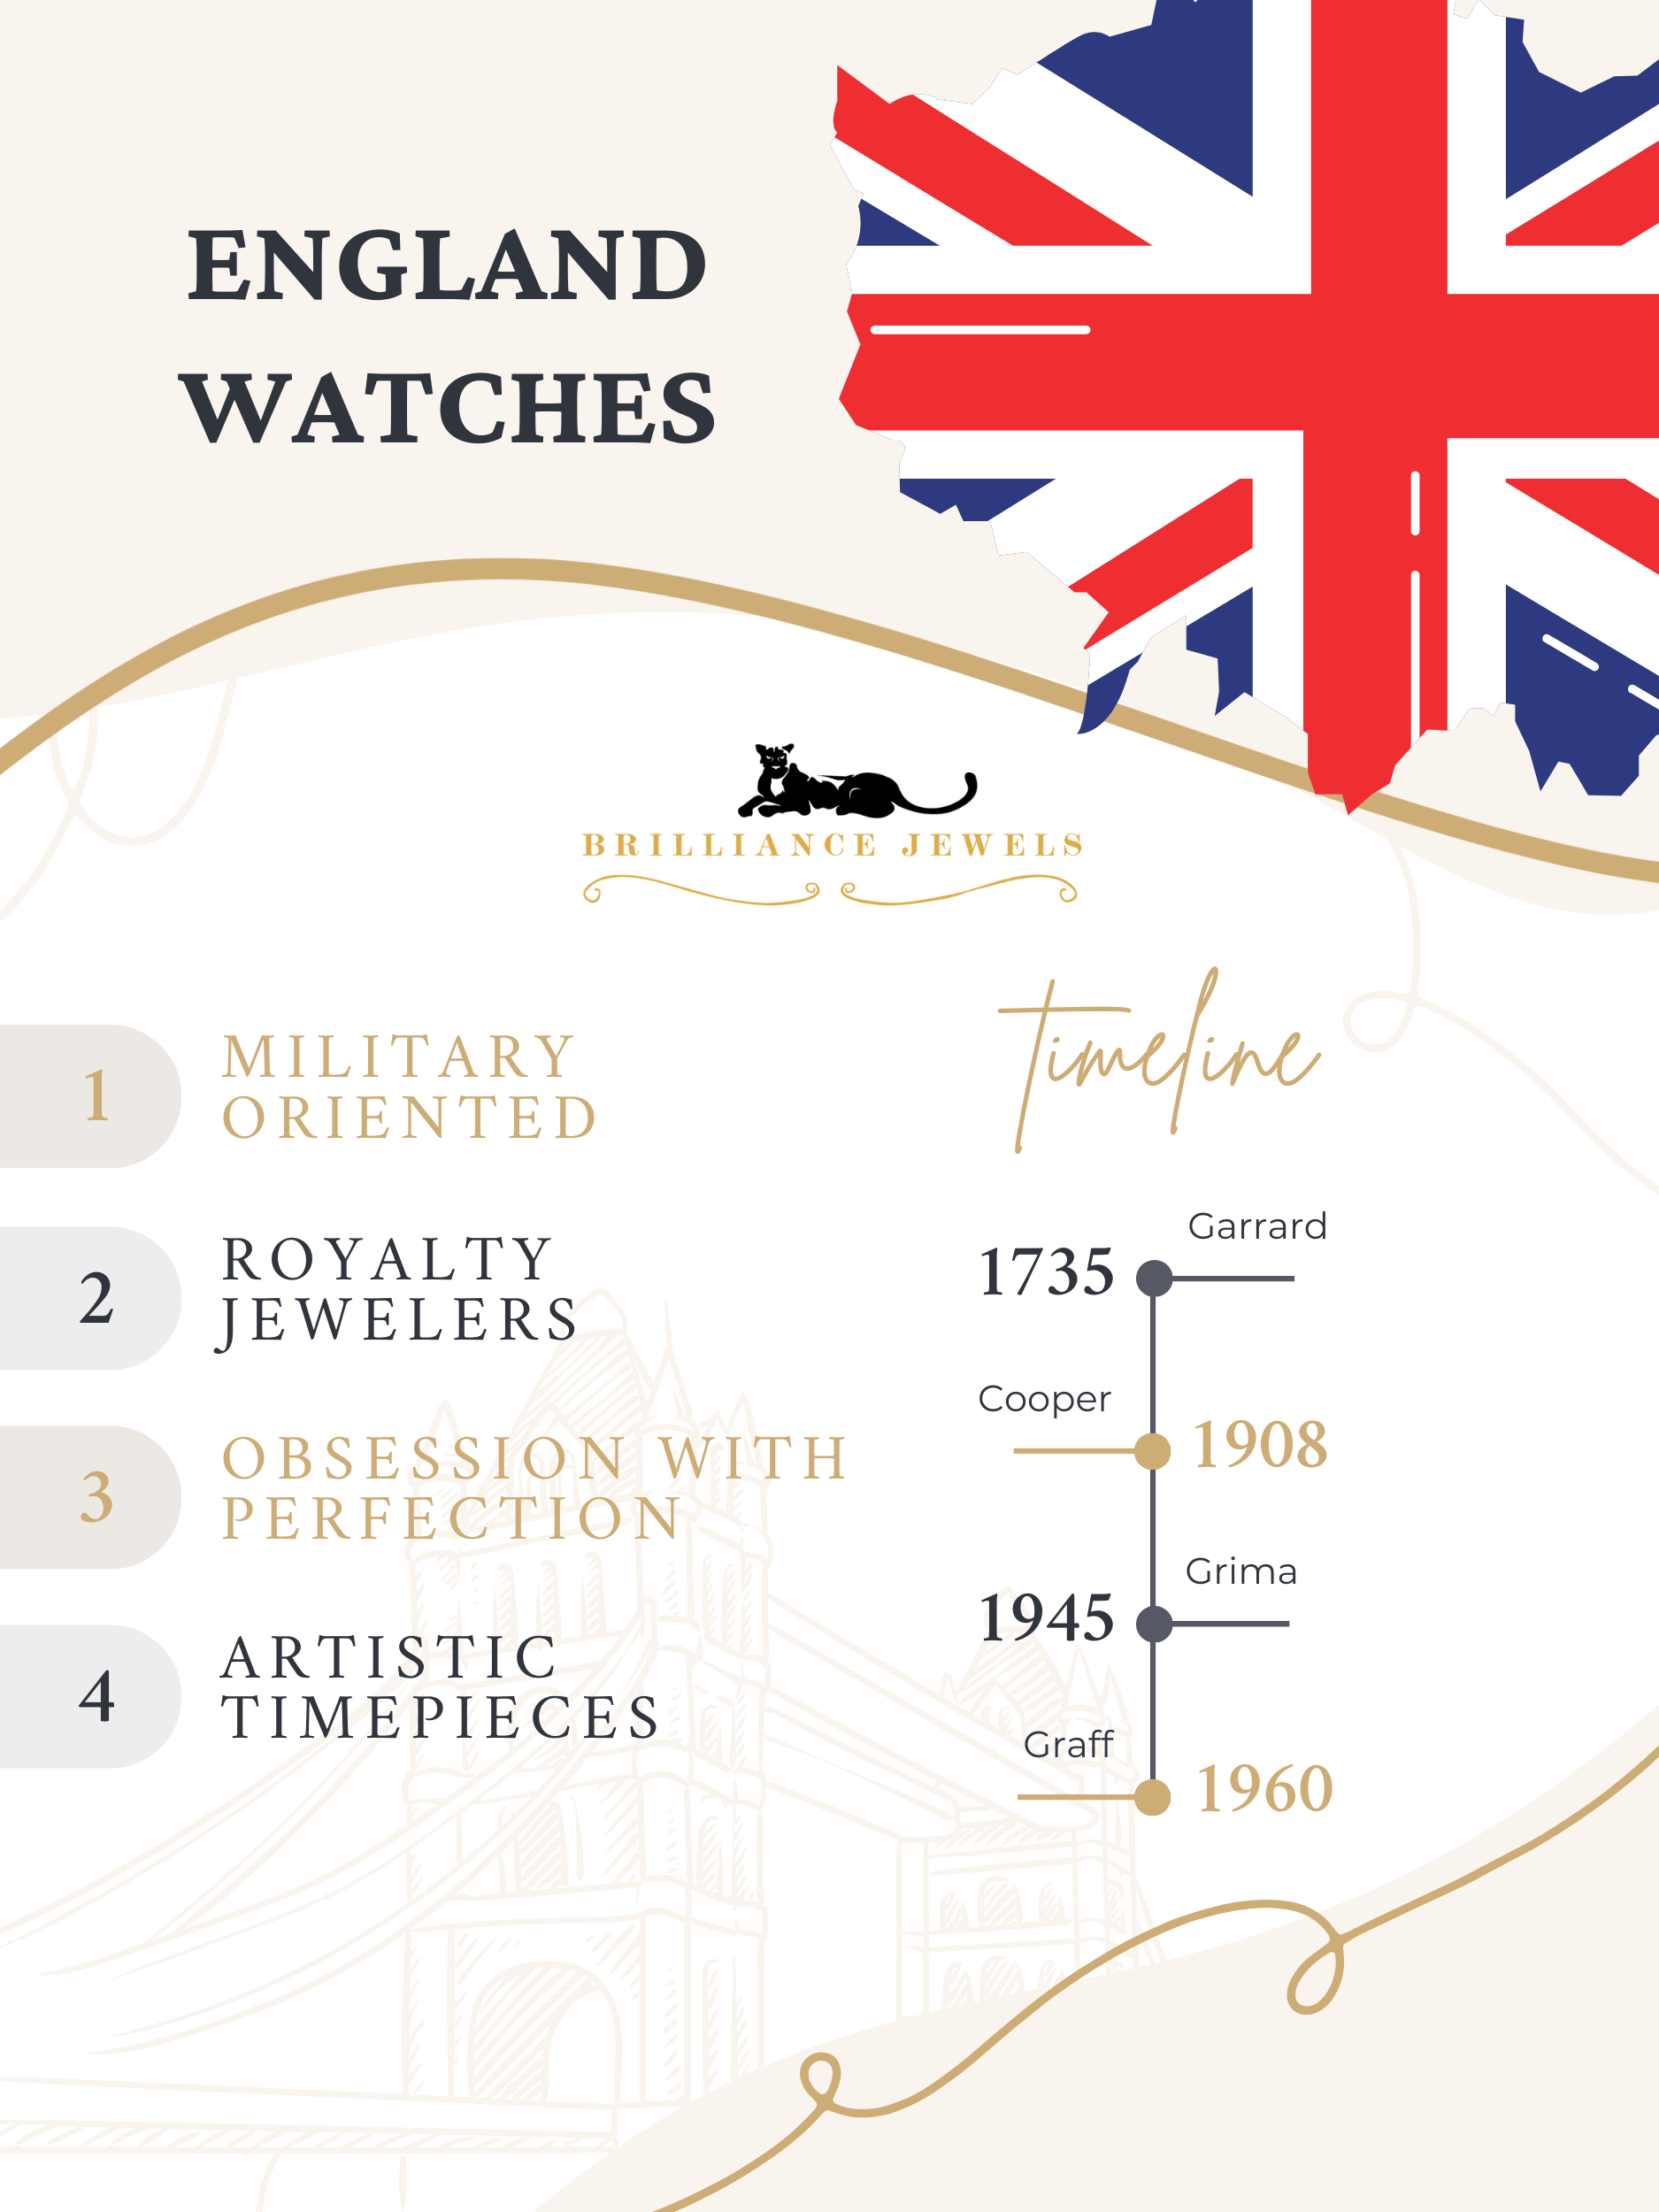 England watches